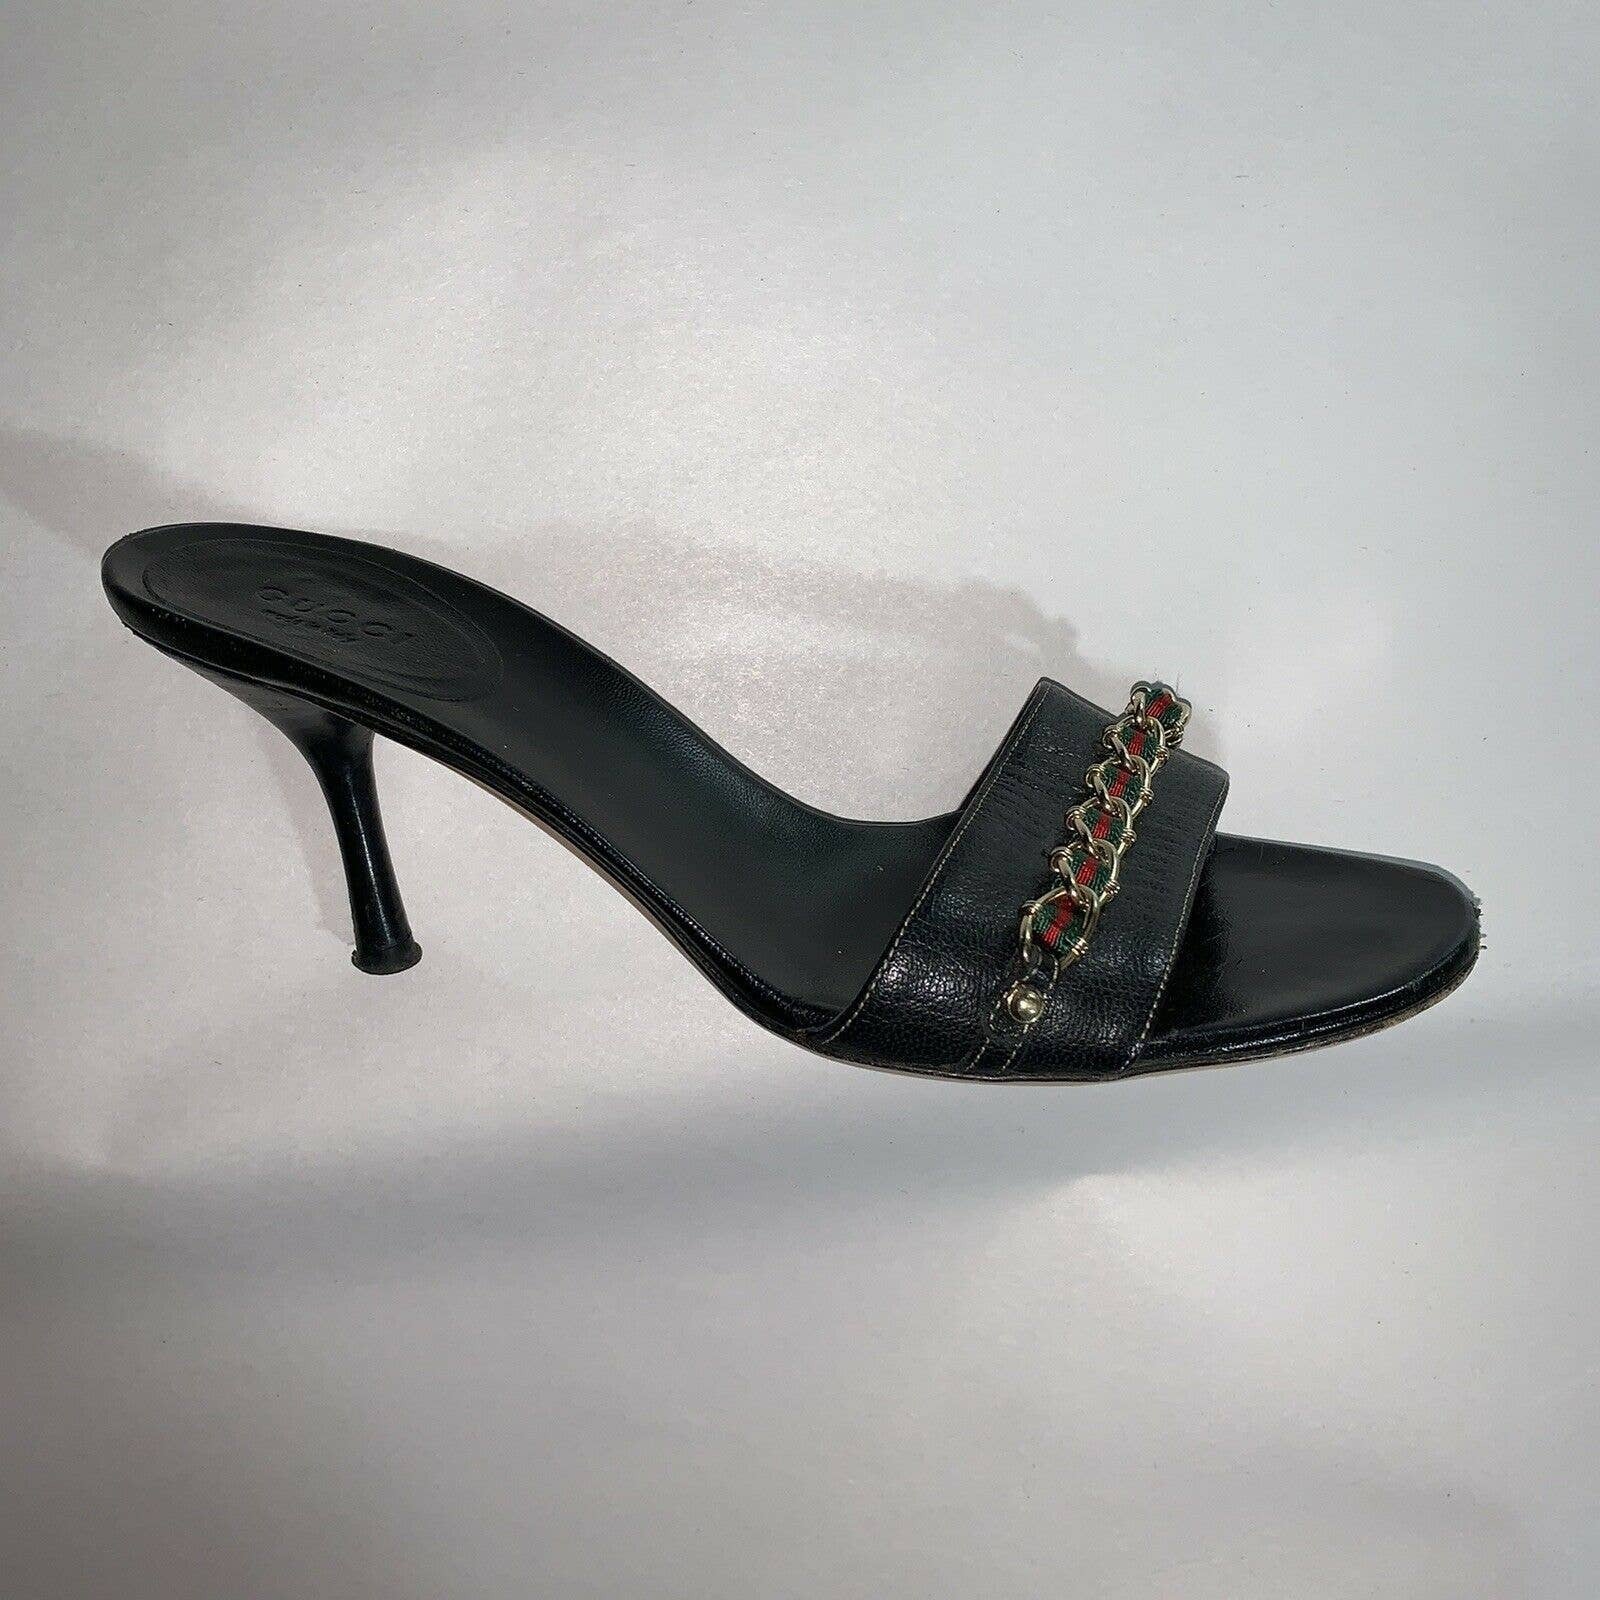 Vintage Gucci Black Calfskin Mules Heels by Gucci | Shop THRILLING